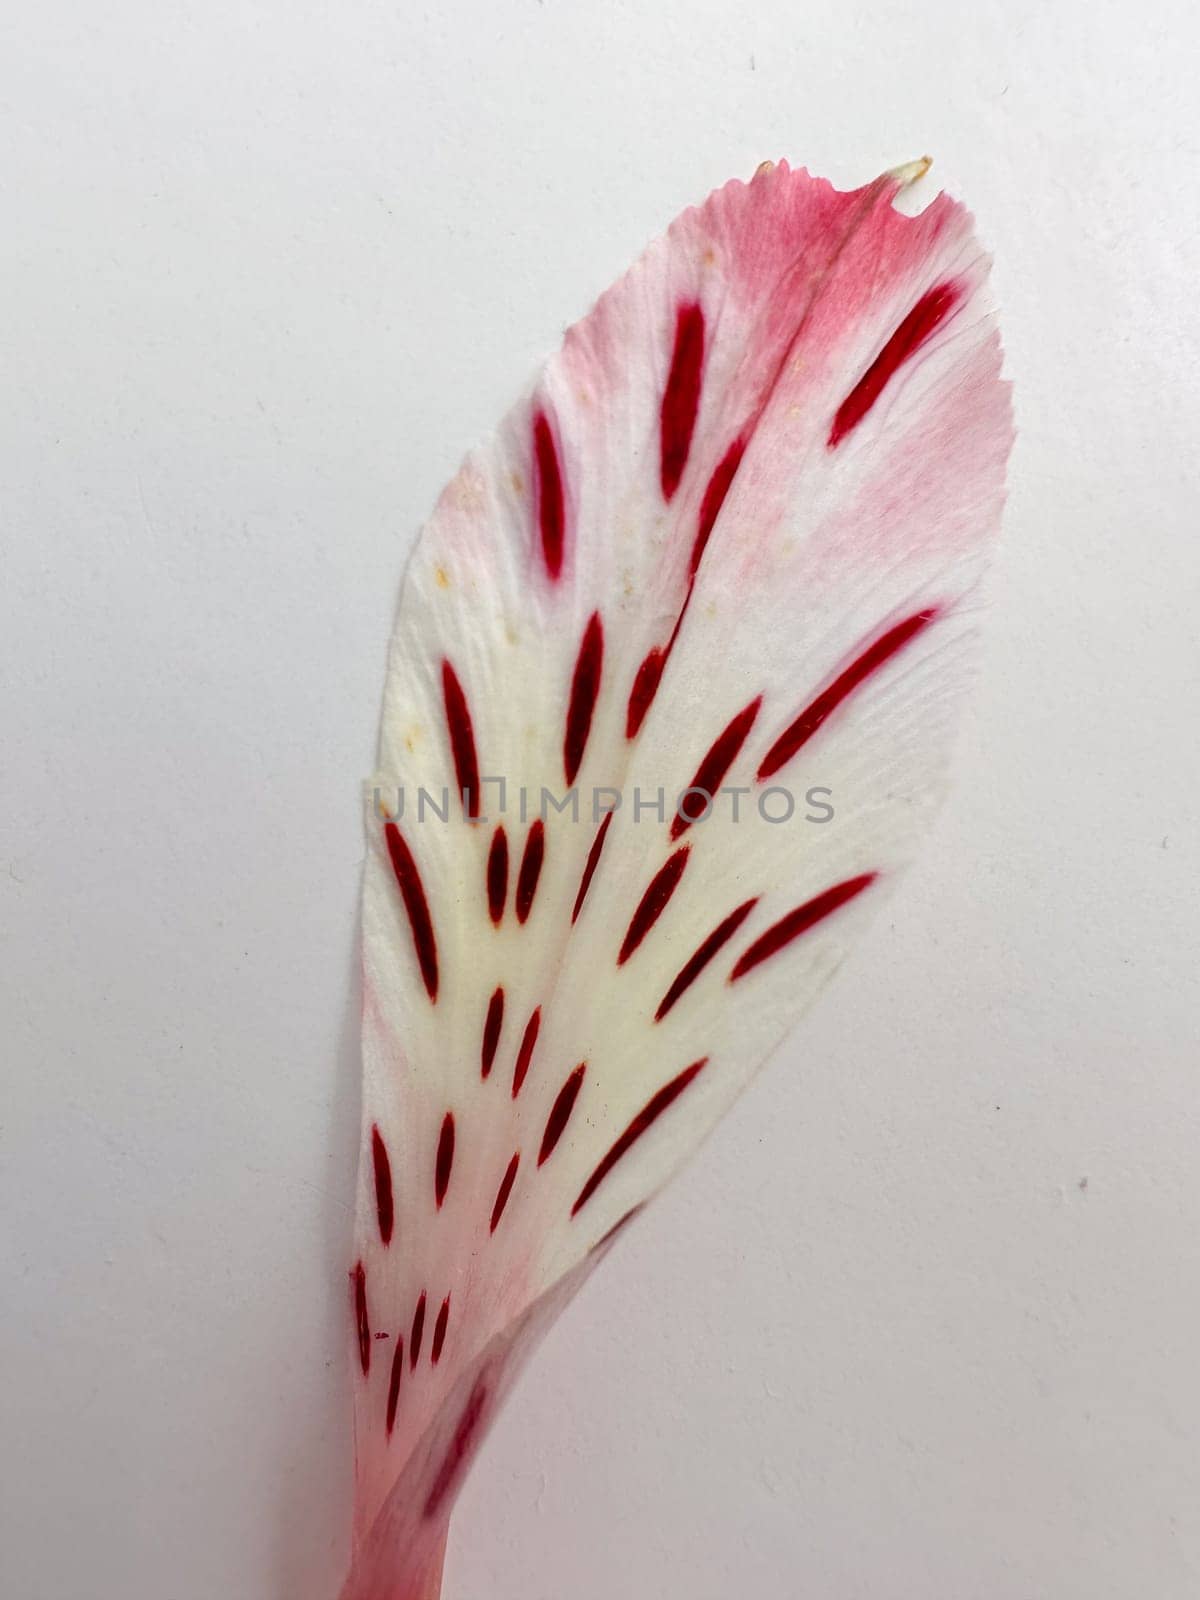 Pink Alstroemeria petal with tiger stripes on white background by voktybre